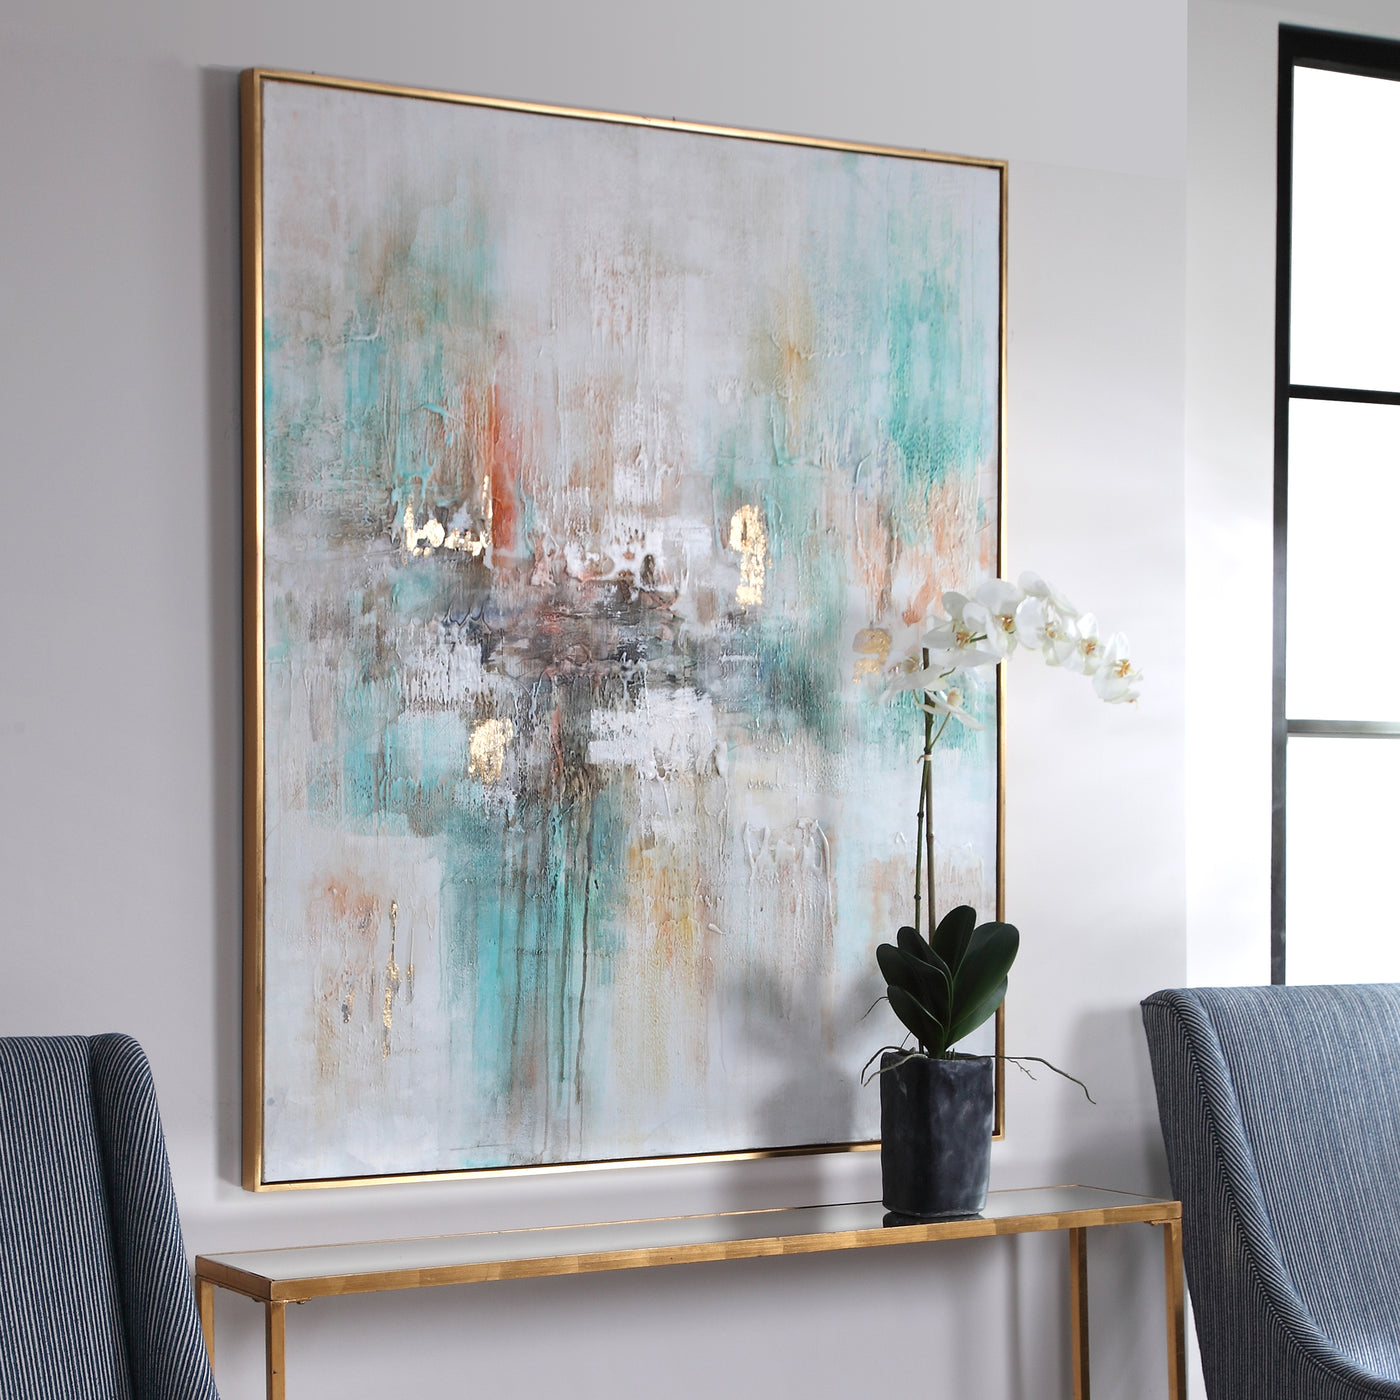 Hand Painted On Canvas, This Abstract Artwork Features Bright Teal And Charcoal Tones With Burnt Orange And Gold Leaf High...